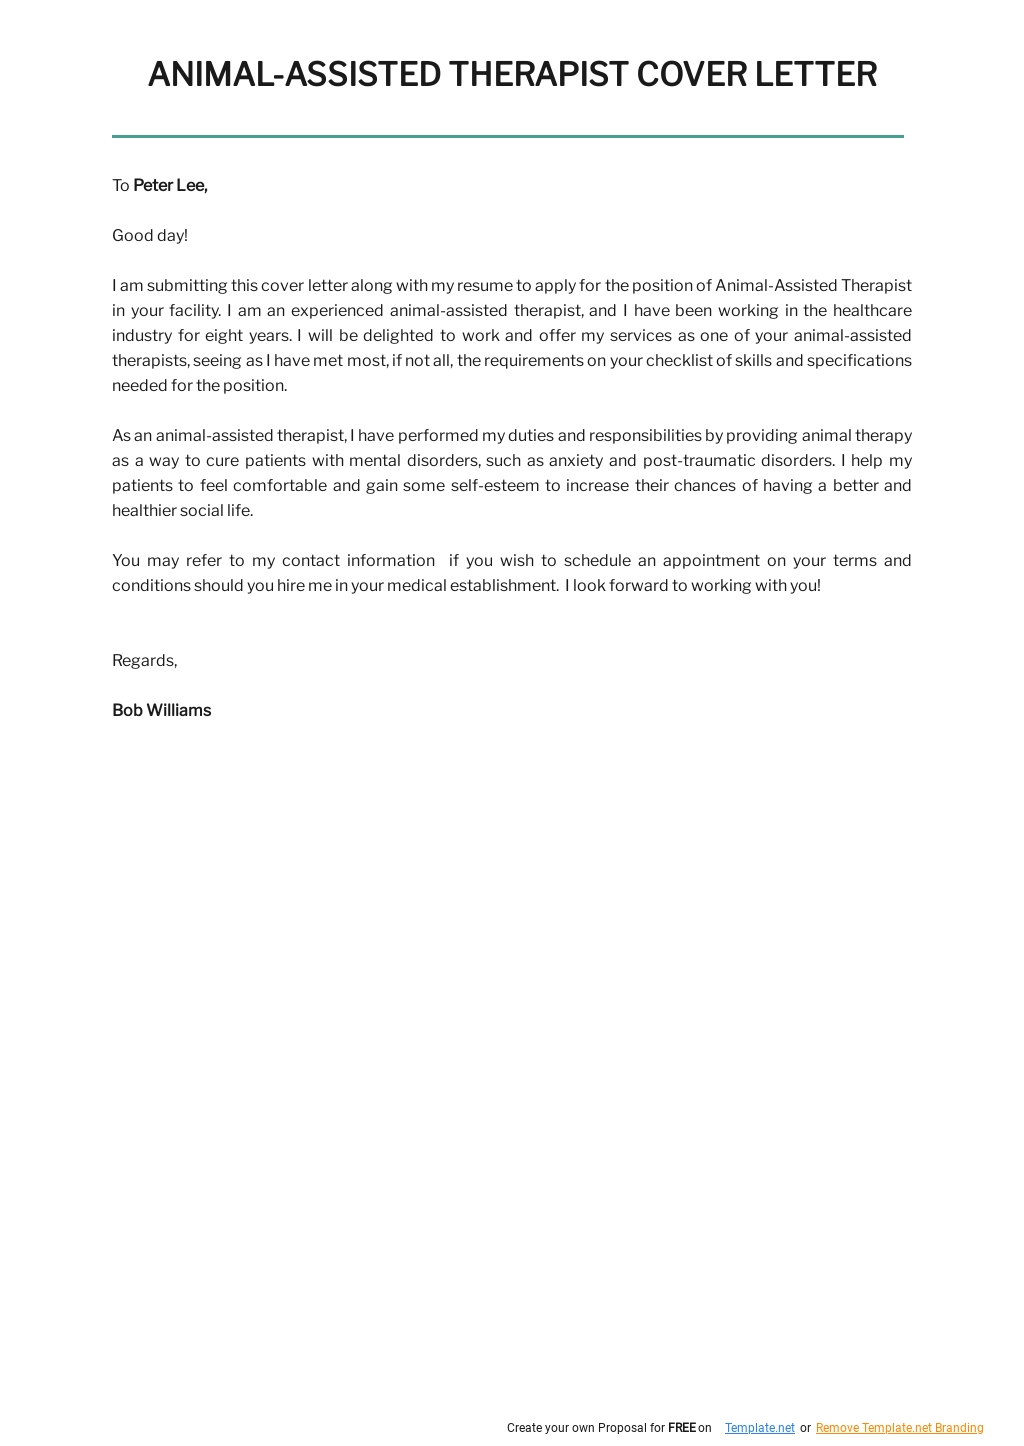 Free Animal Assisted Therapist Cover Letter Template.jpe